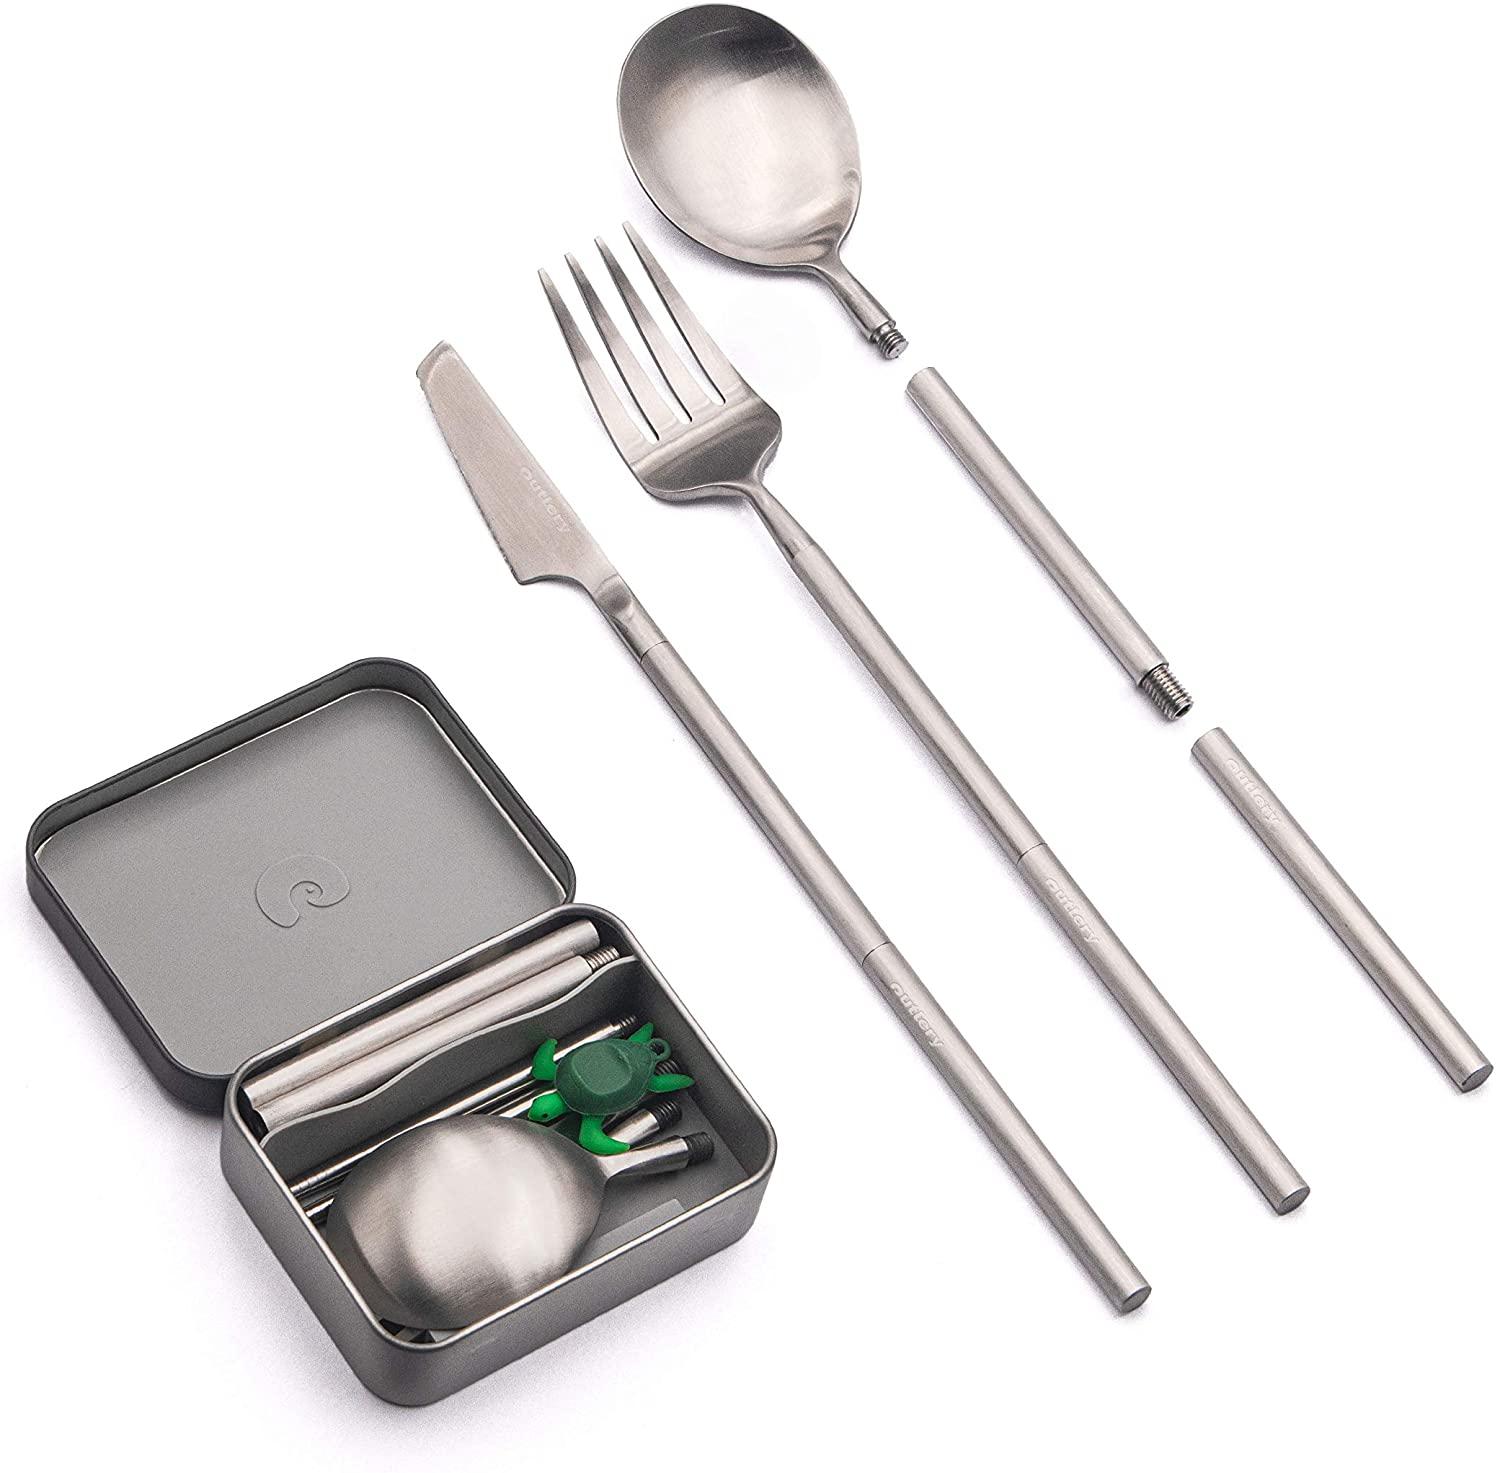 Outlery Flatware Camping Utensils, 5-Piece